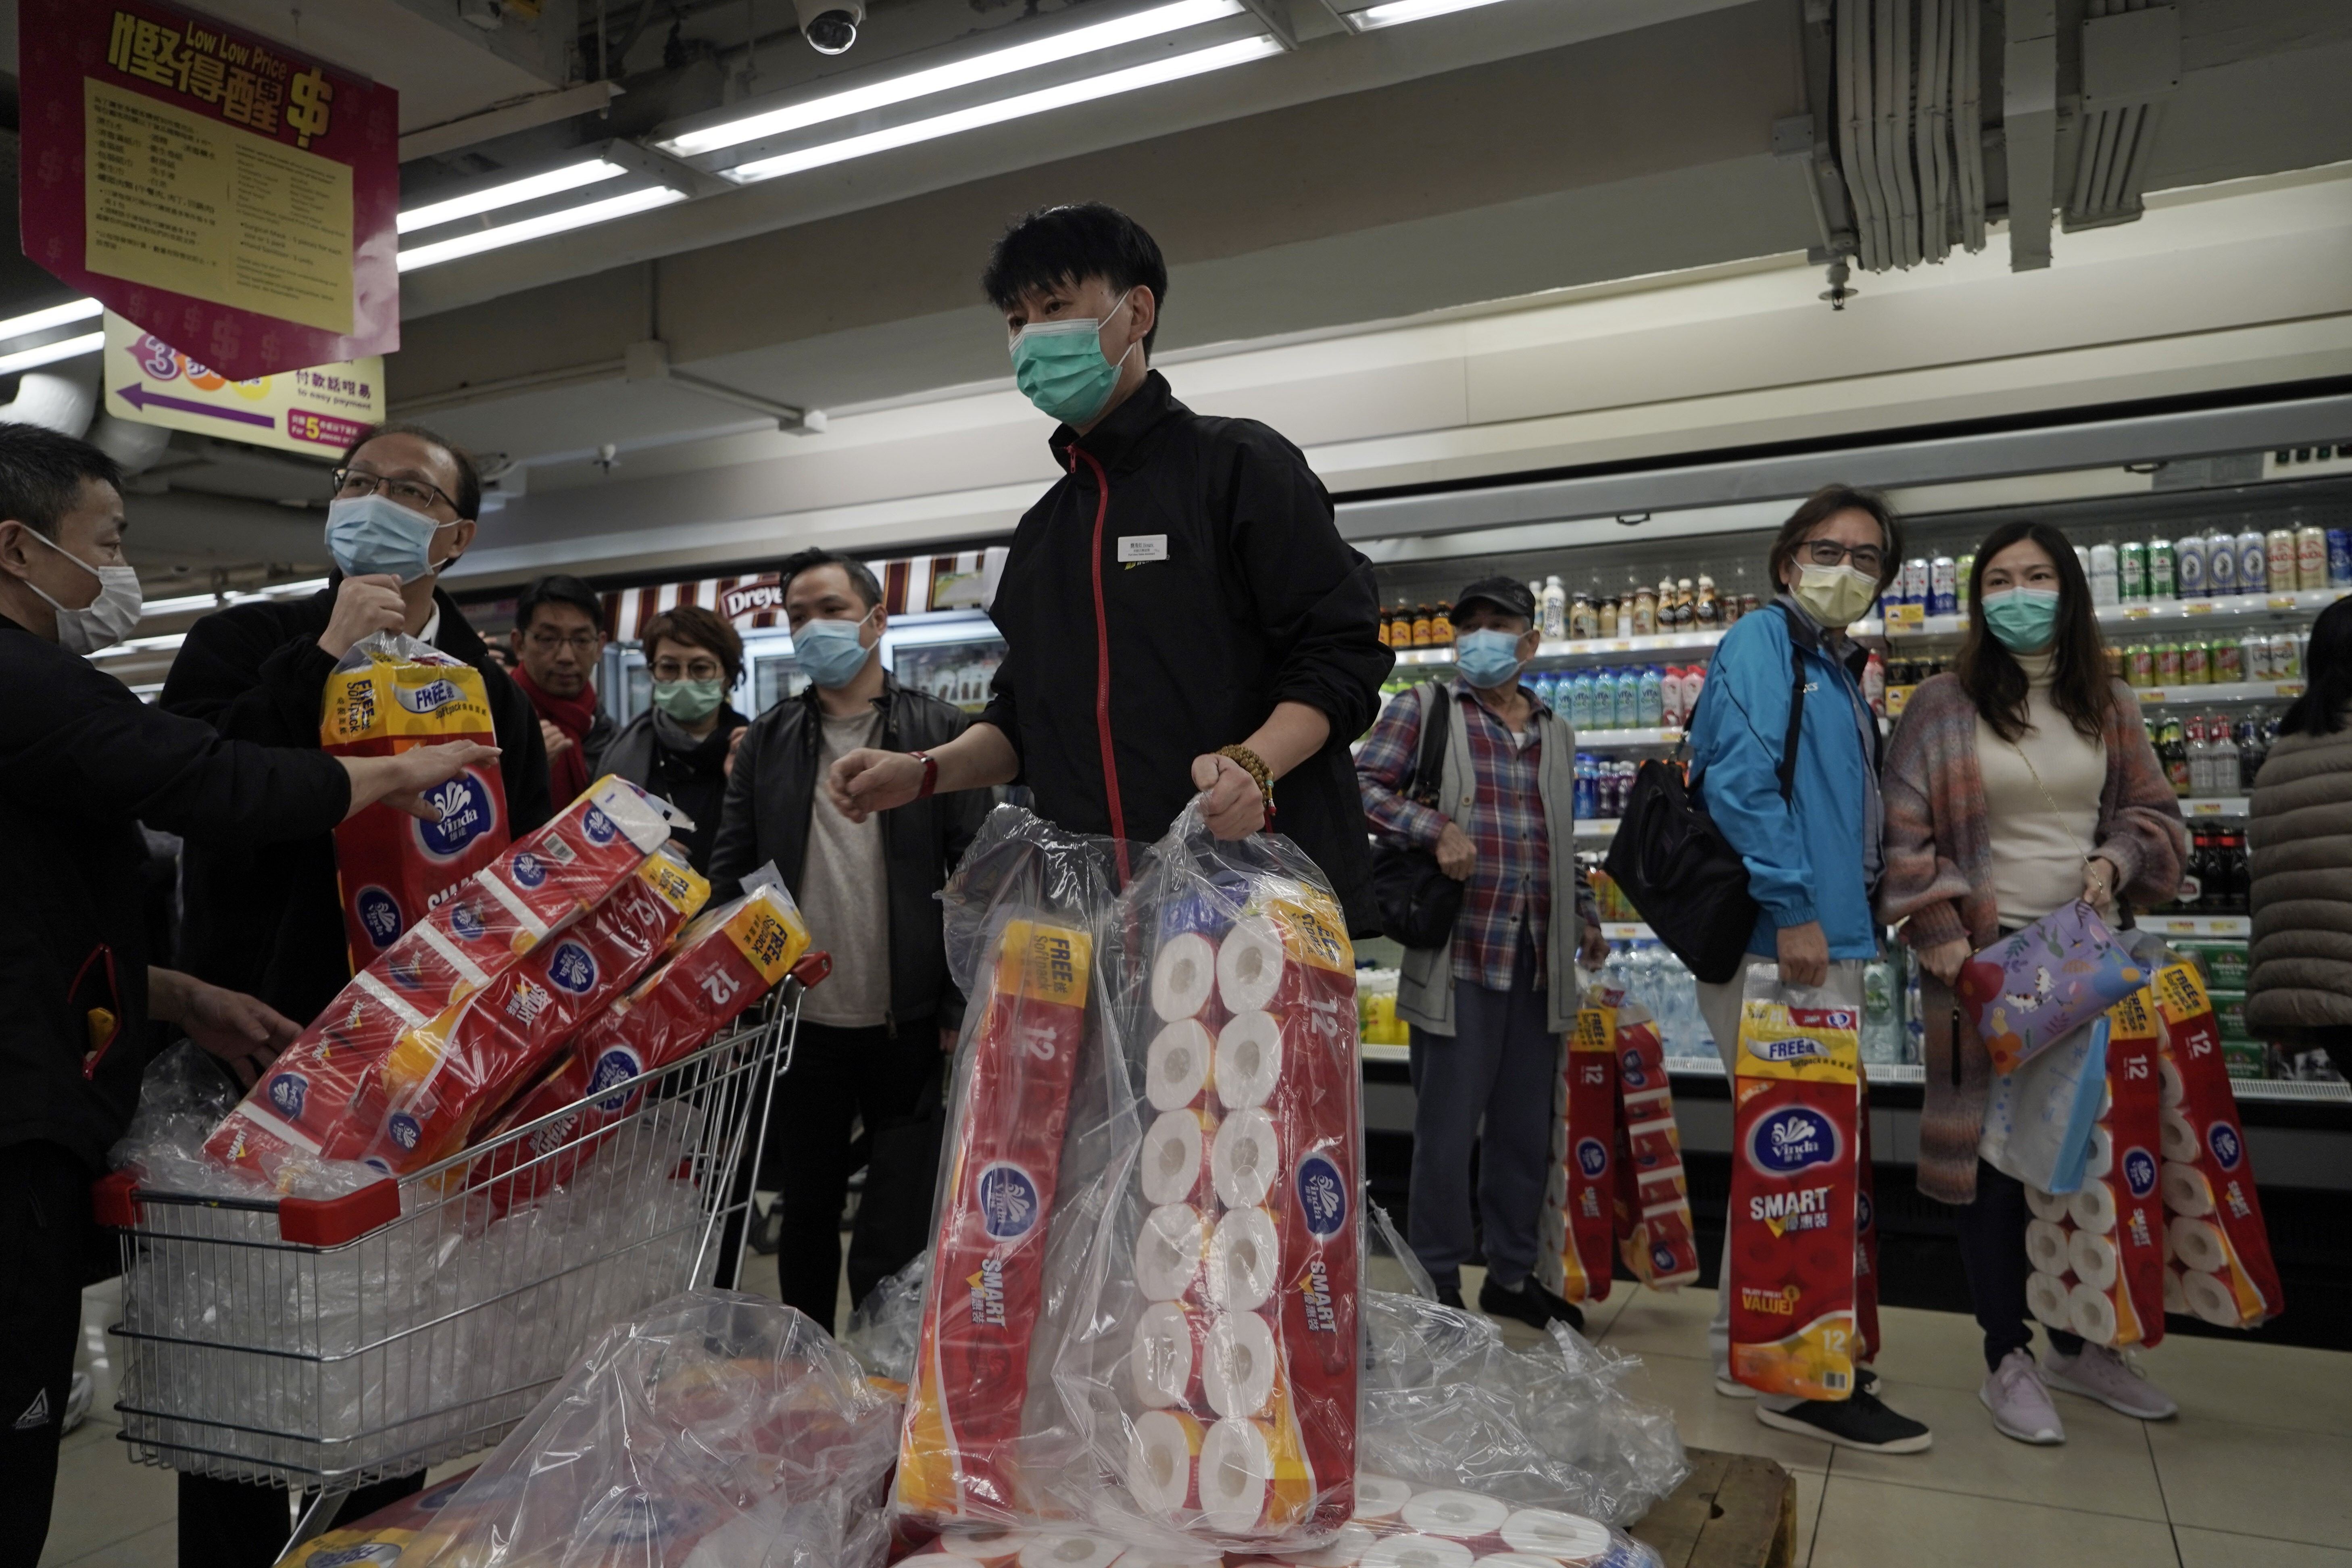 Customers queue to buy supplies of toilet paper in Hong Kong on February 14, as mainland Chinese reports of surging Covid-19 cases left supermarket shelves emptied in the city. Photo: AP